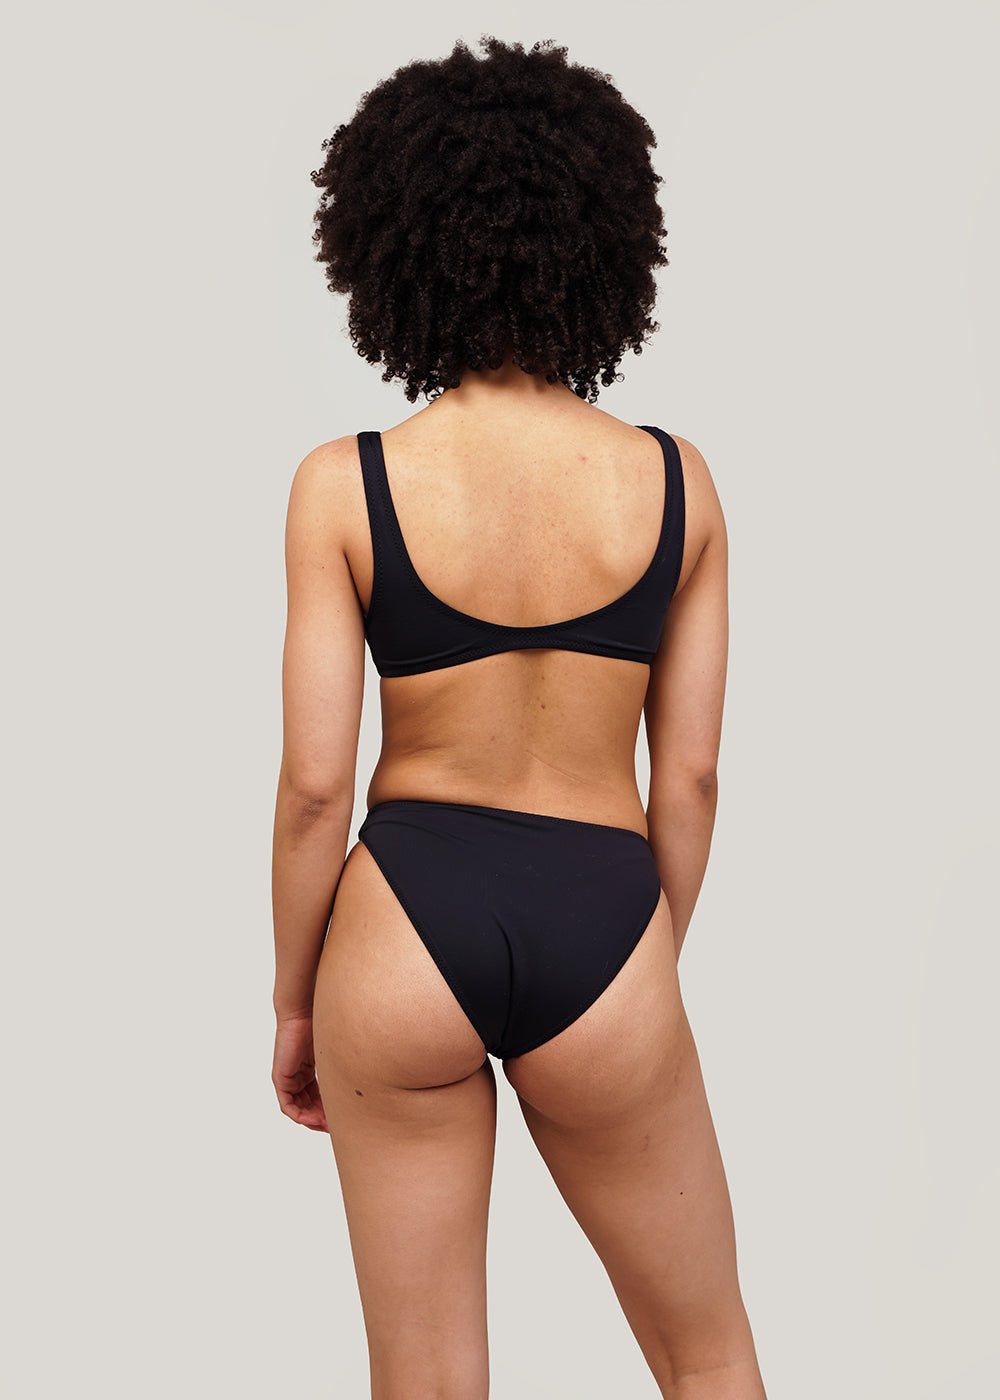 https://newclassics.ca/cdn/shop/products/kye-intimates-black-lap-swim-brief-new-classics-studios-sustainable-and-ethical-fashion-canada-784275_1000x.jpg?v=1687281678